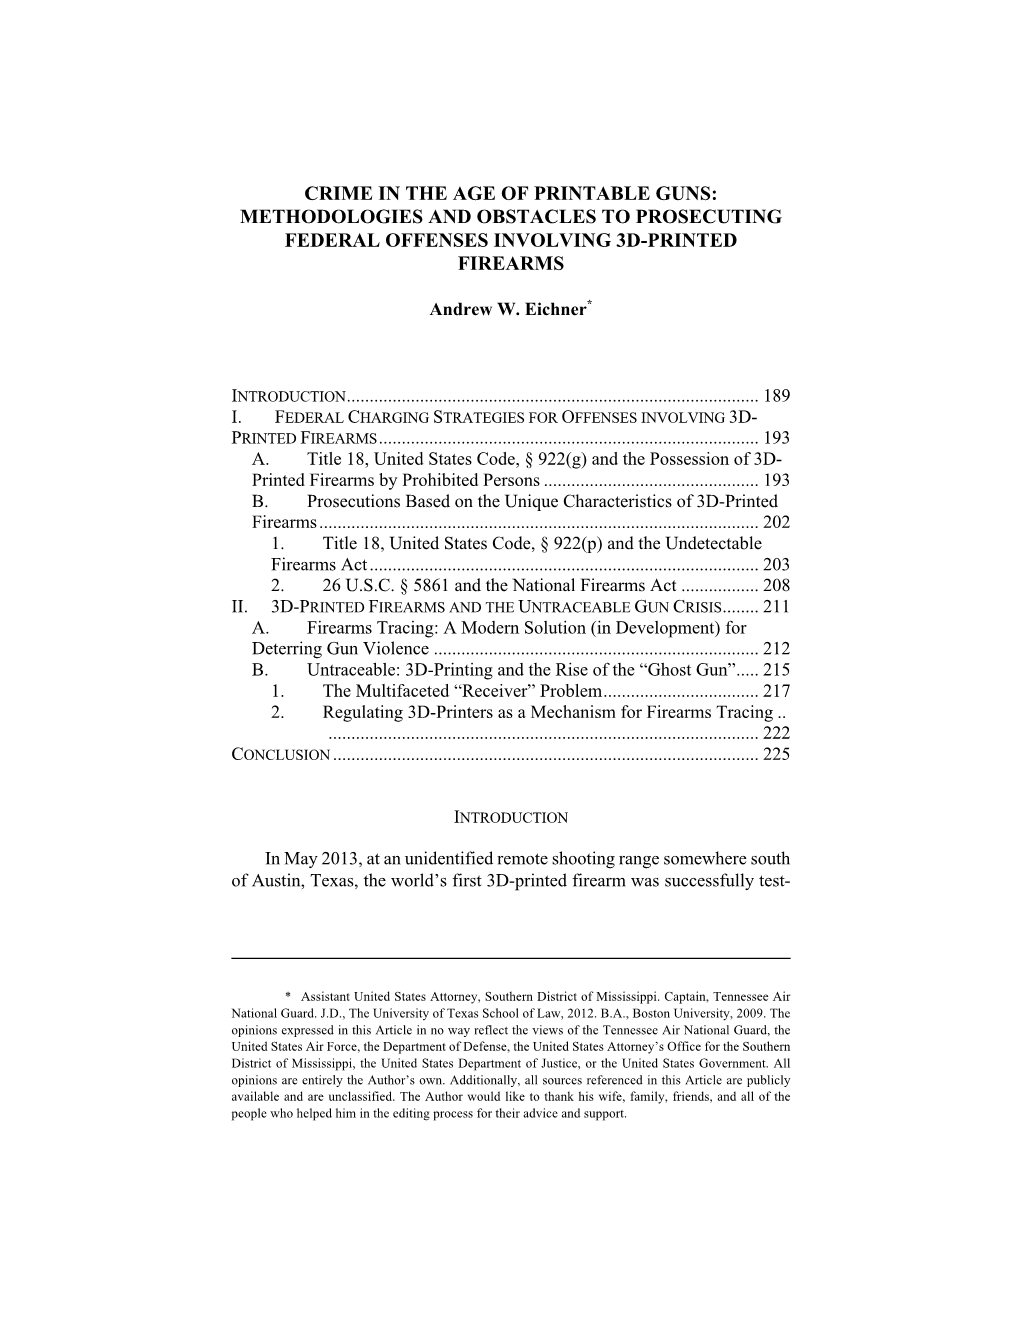 Crime in the Age of Printable Guns: Methodologies and Obstacles to Prosecuting Federal Offenses Involving 3D-Printed Firearms